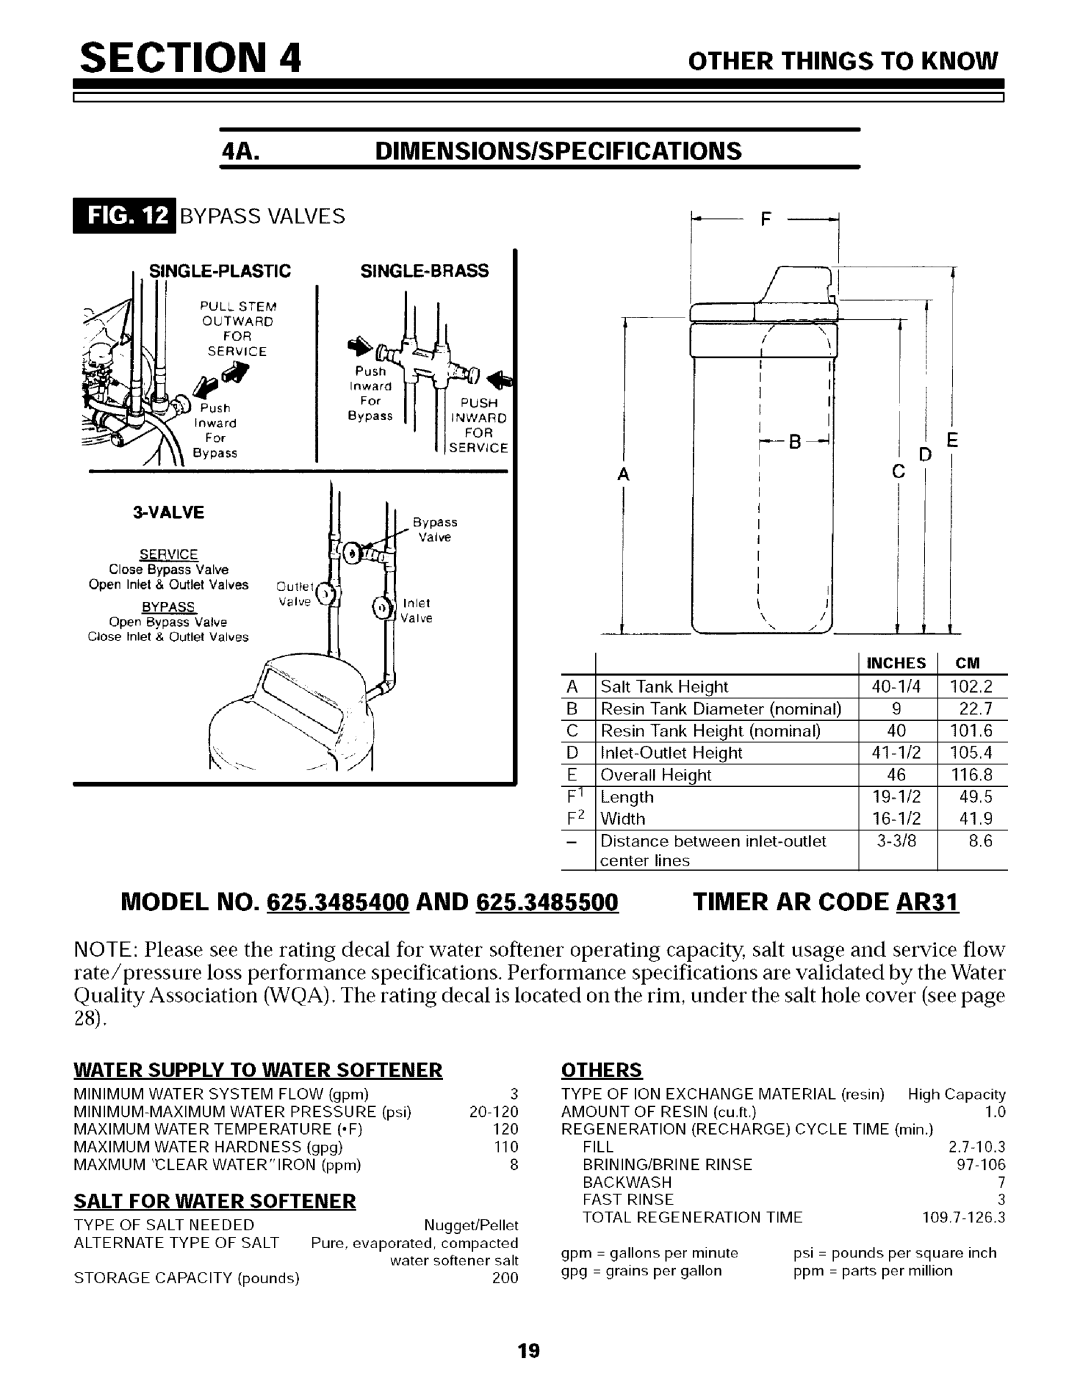 Sears 625.34855, 625.34854 owner manual Other Things to Know DIMENSIONS/SPECIFICATIONS, Timer AR Code AR31, Bypass Valves 